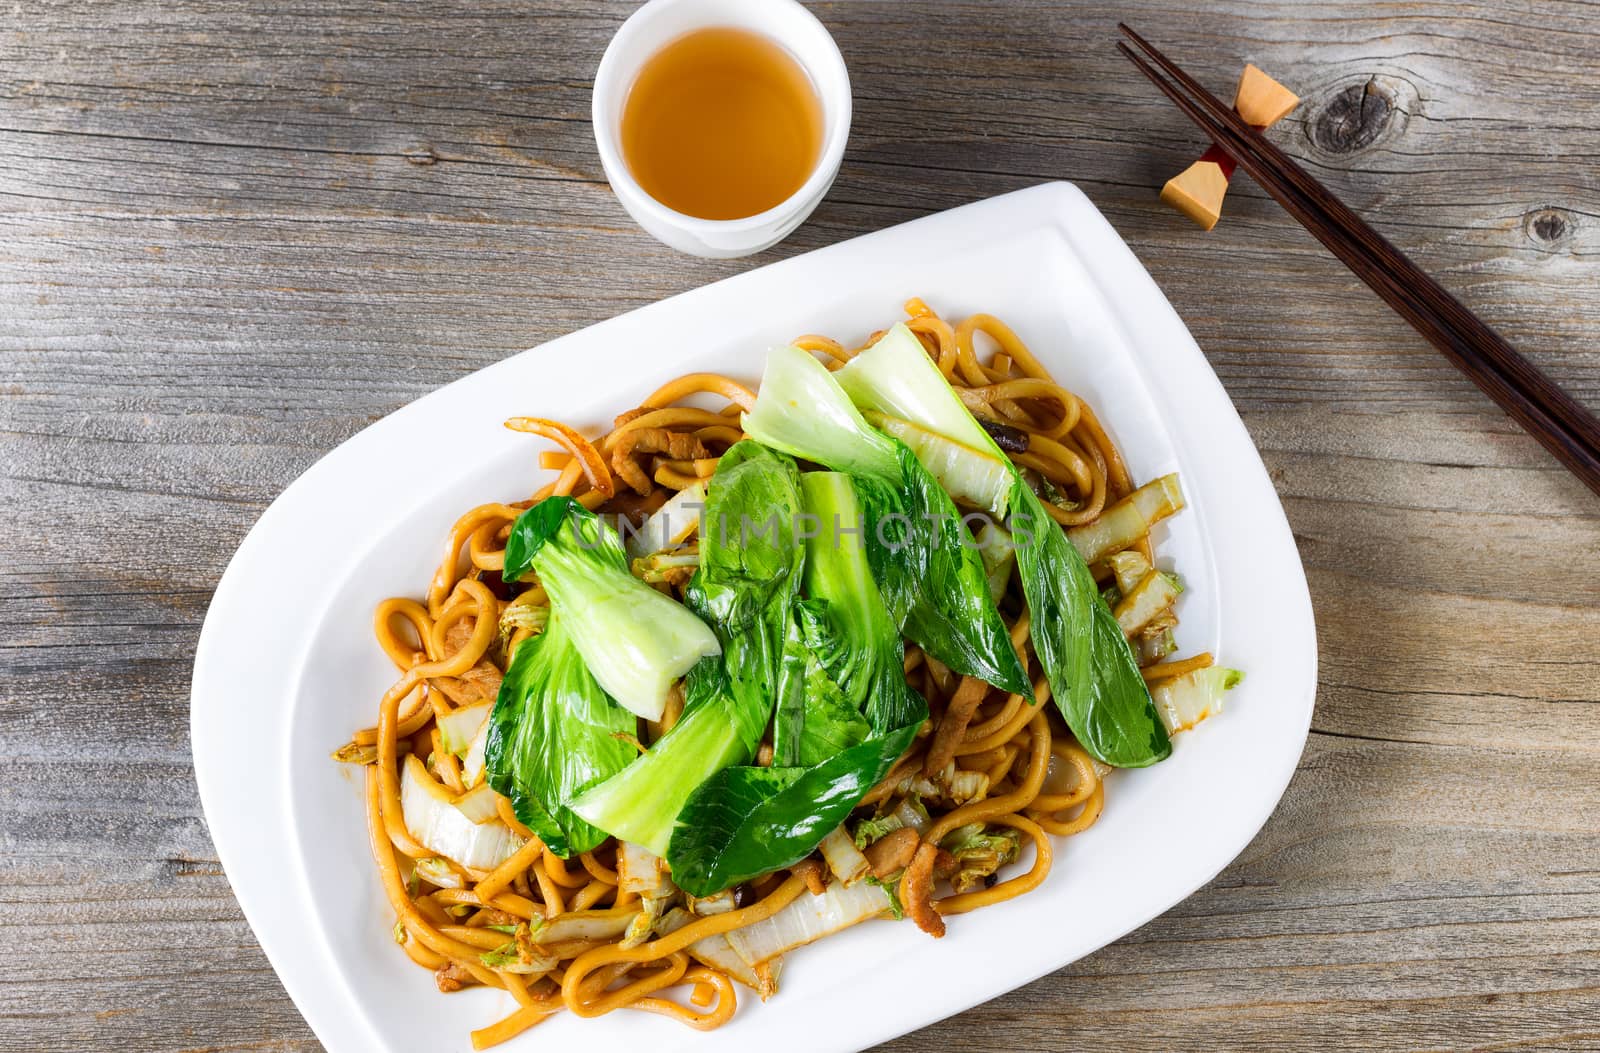 Chinese spicy noodle and vegetable dish with green tea by tab1962